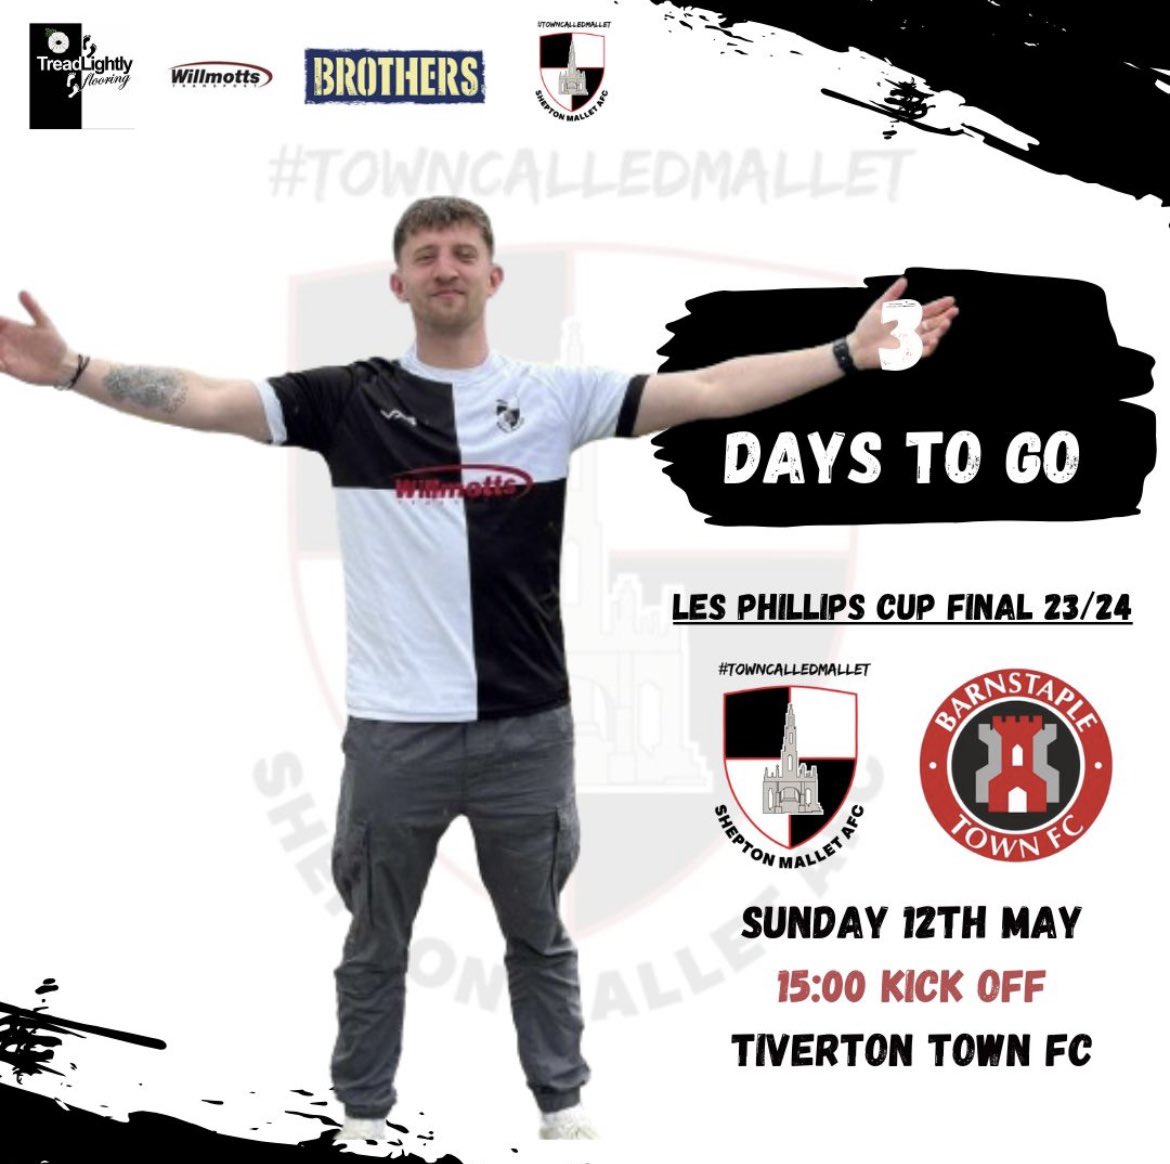 ⏰ 3 days to go Mallet fans⏰🖤🤍